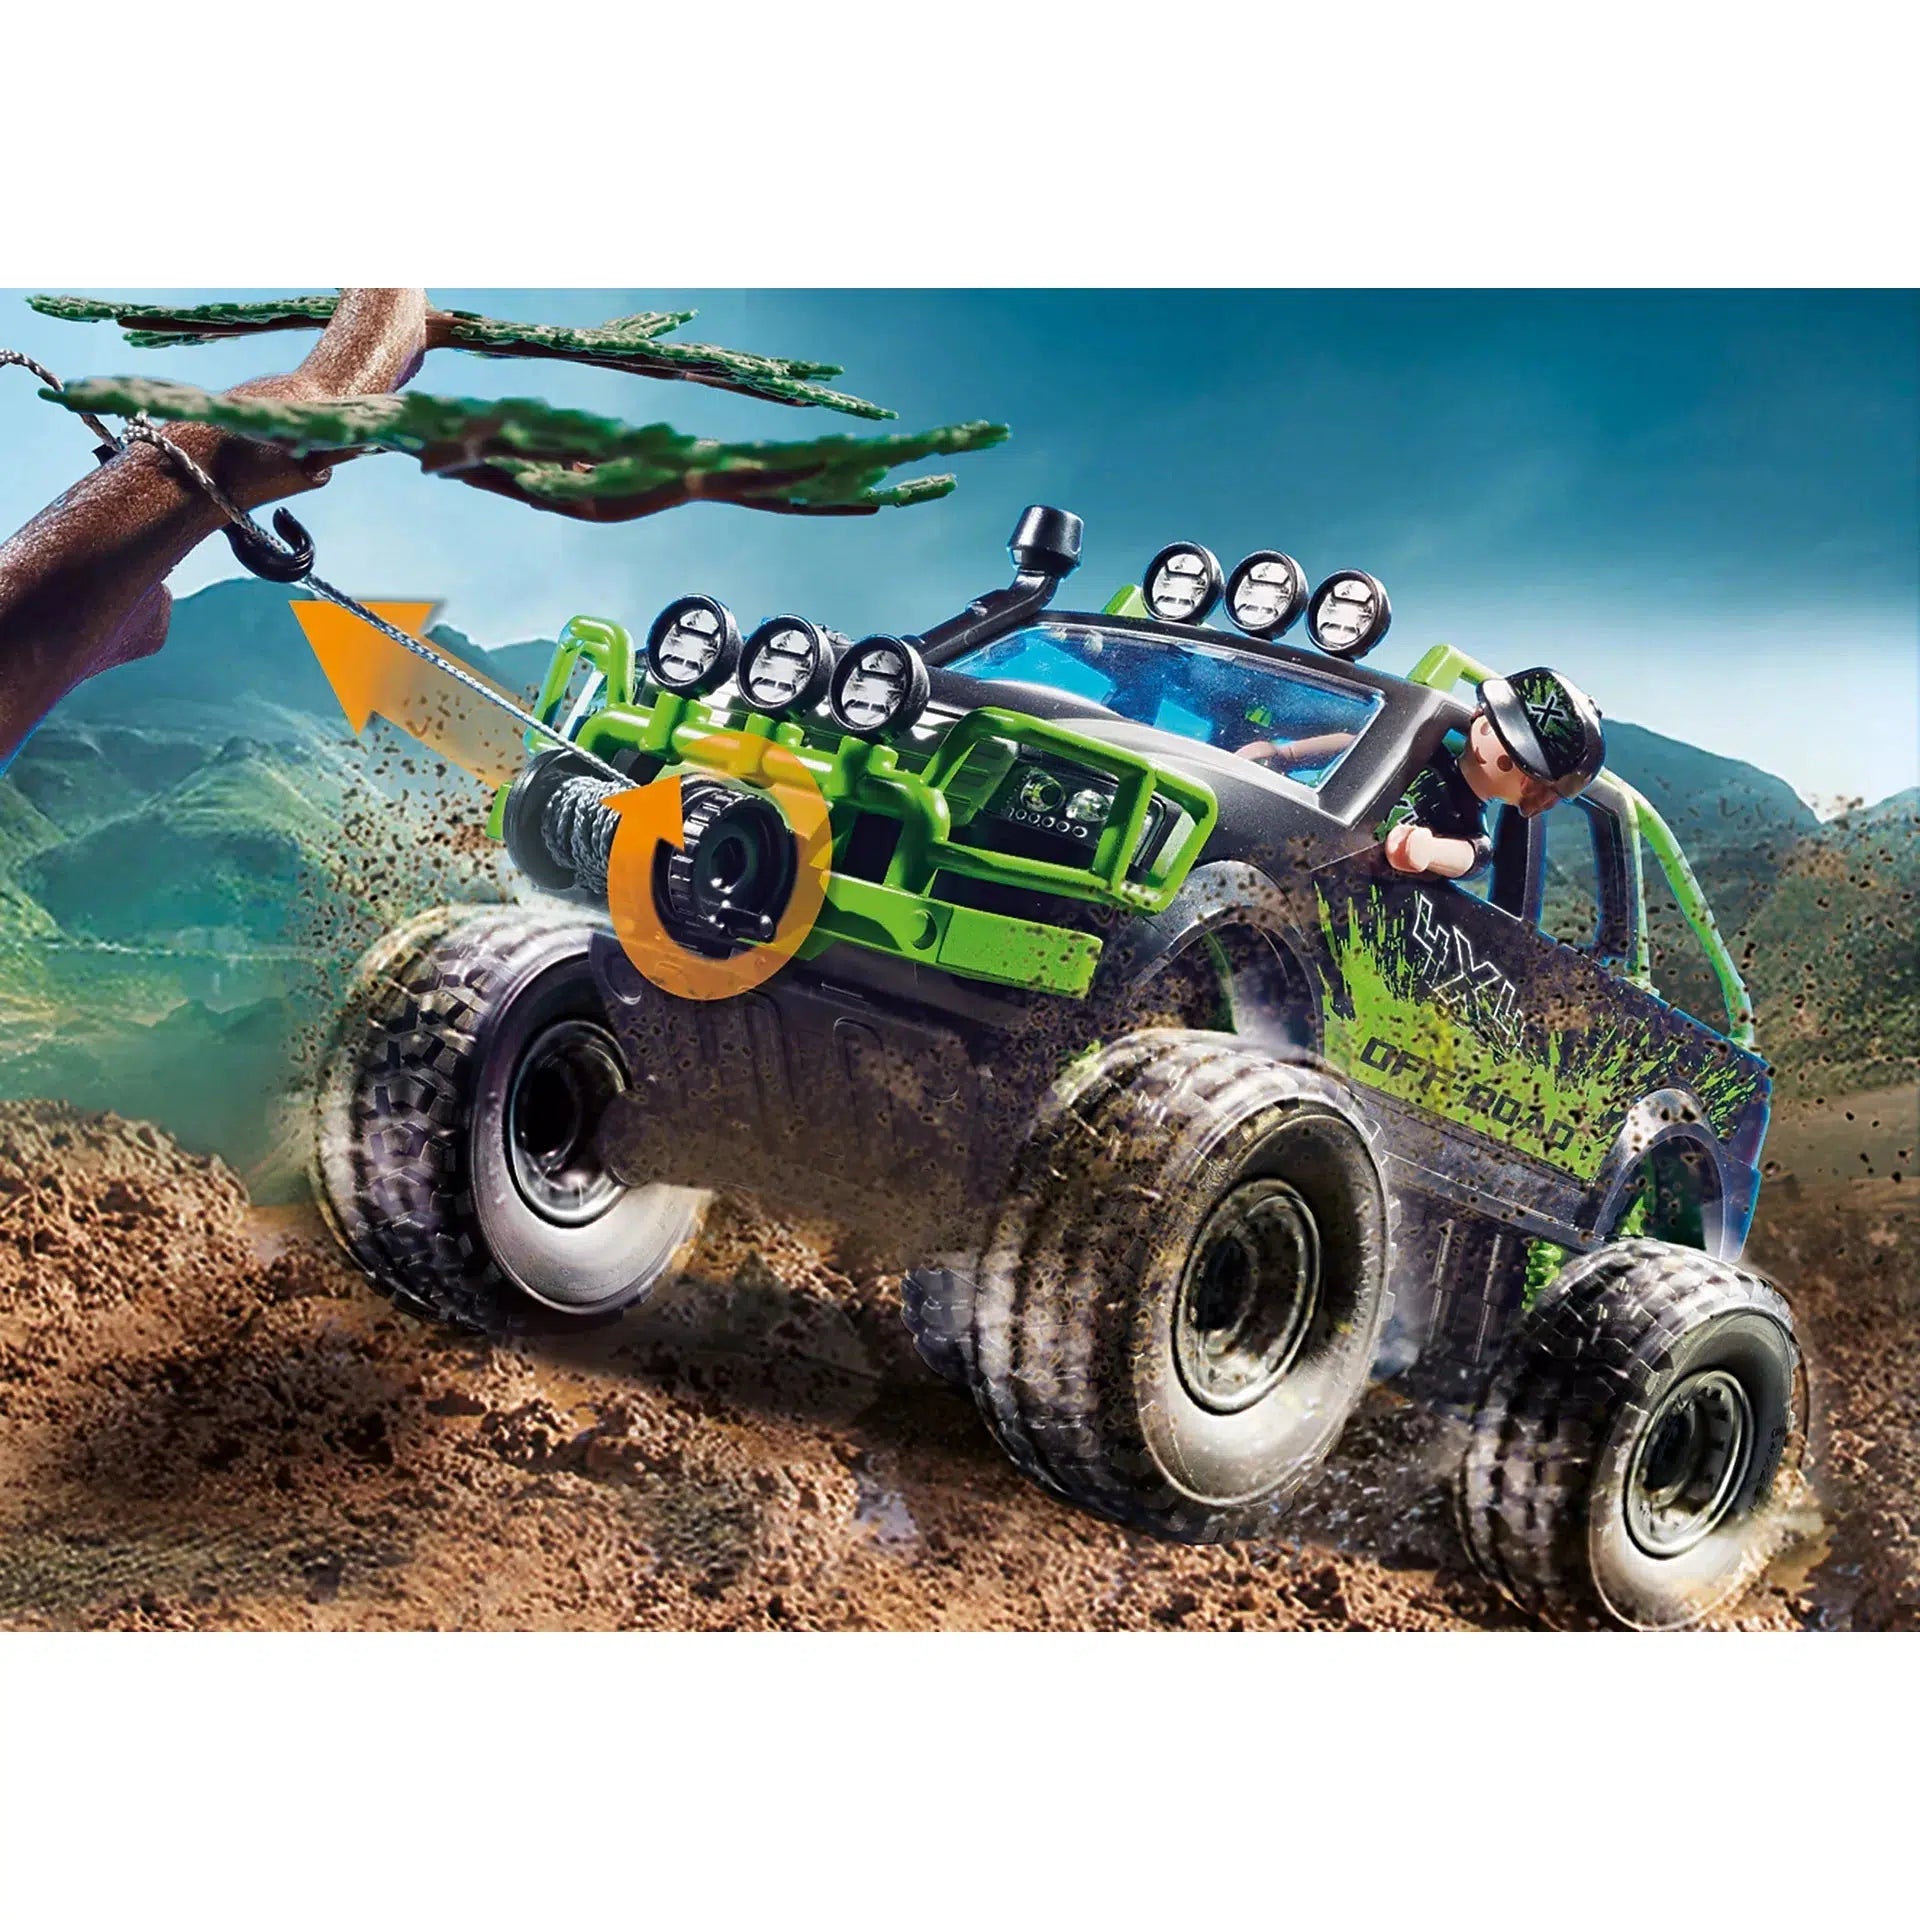 Playmobil-Off-Road Action - Weekend Warrior-70460-Legacy Toys